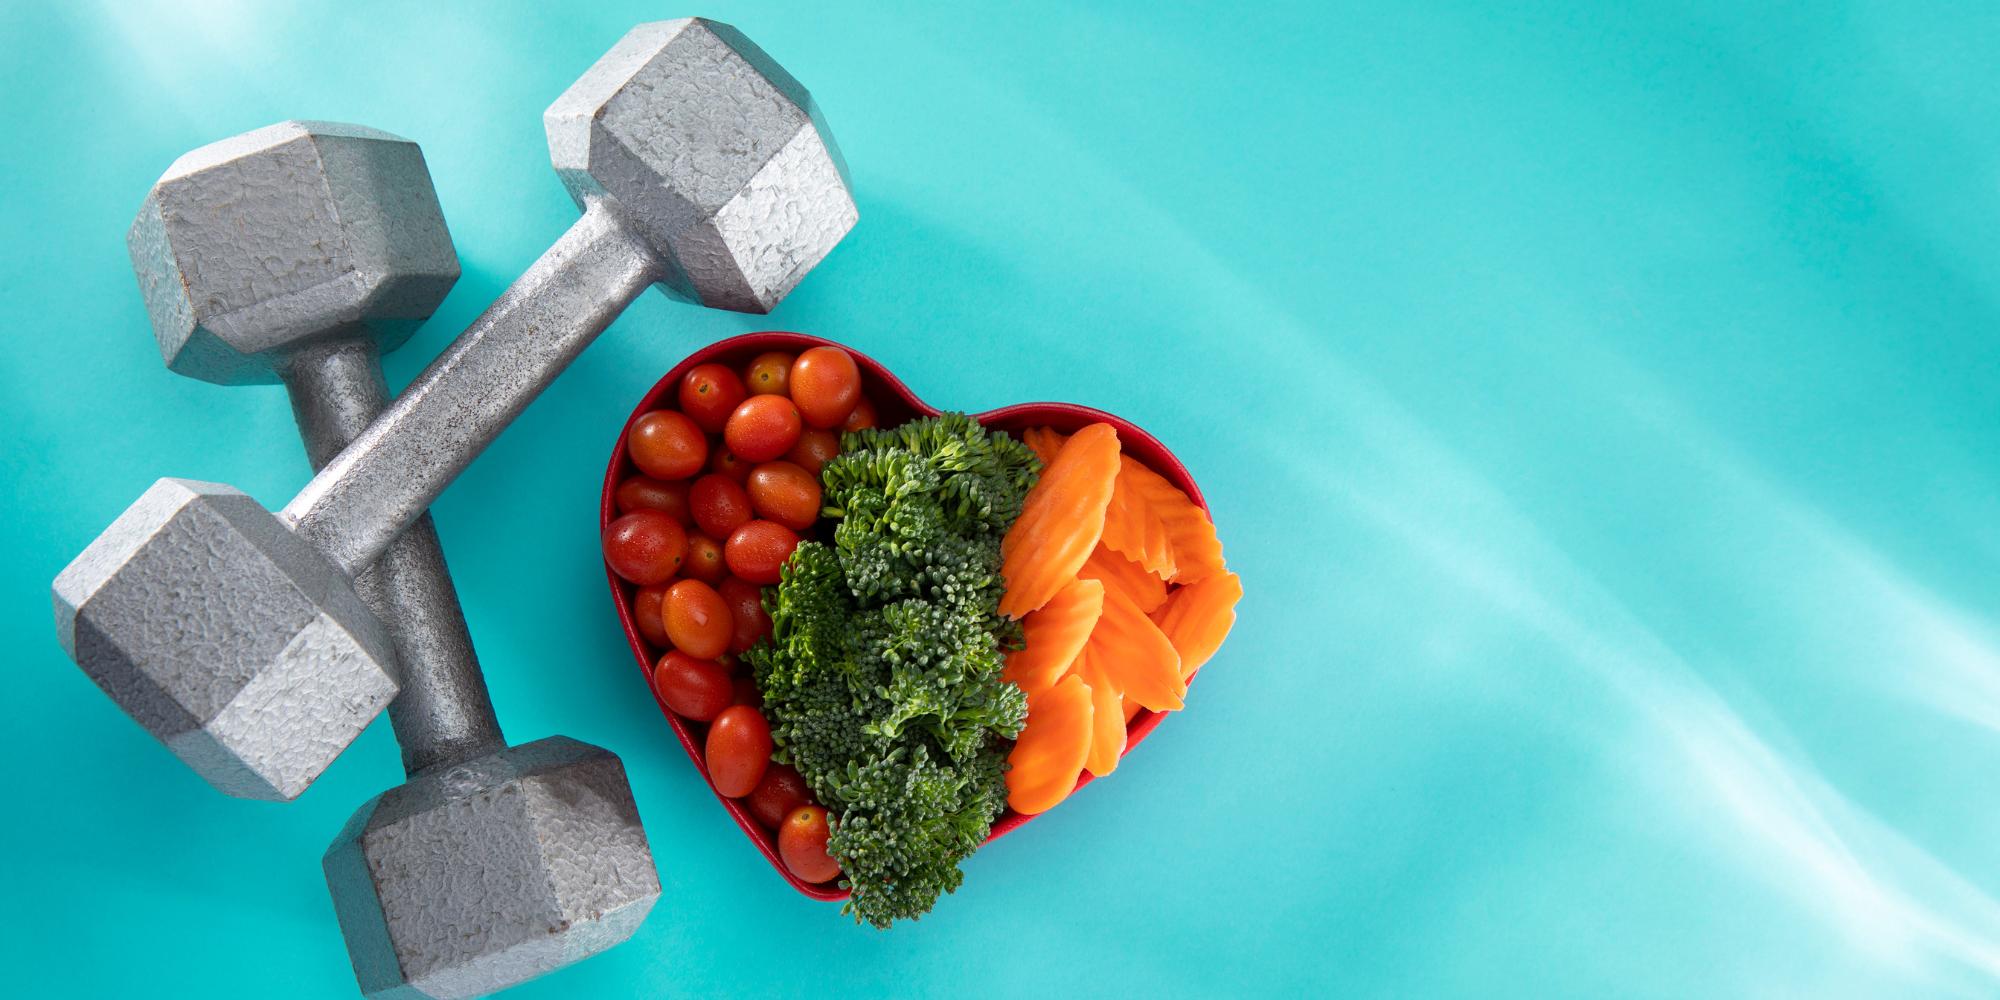 A pair of metal weights (maybe 8 lbs) next to a heart shaped plate full of carrots, broccoli, and cherry tomatoes